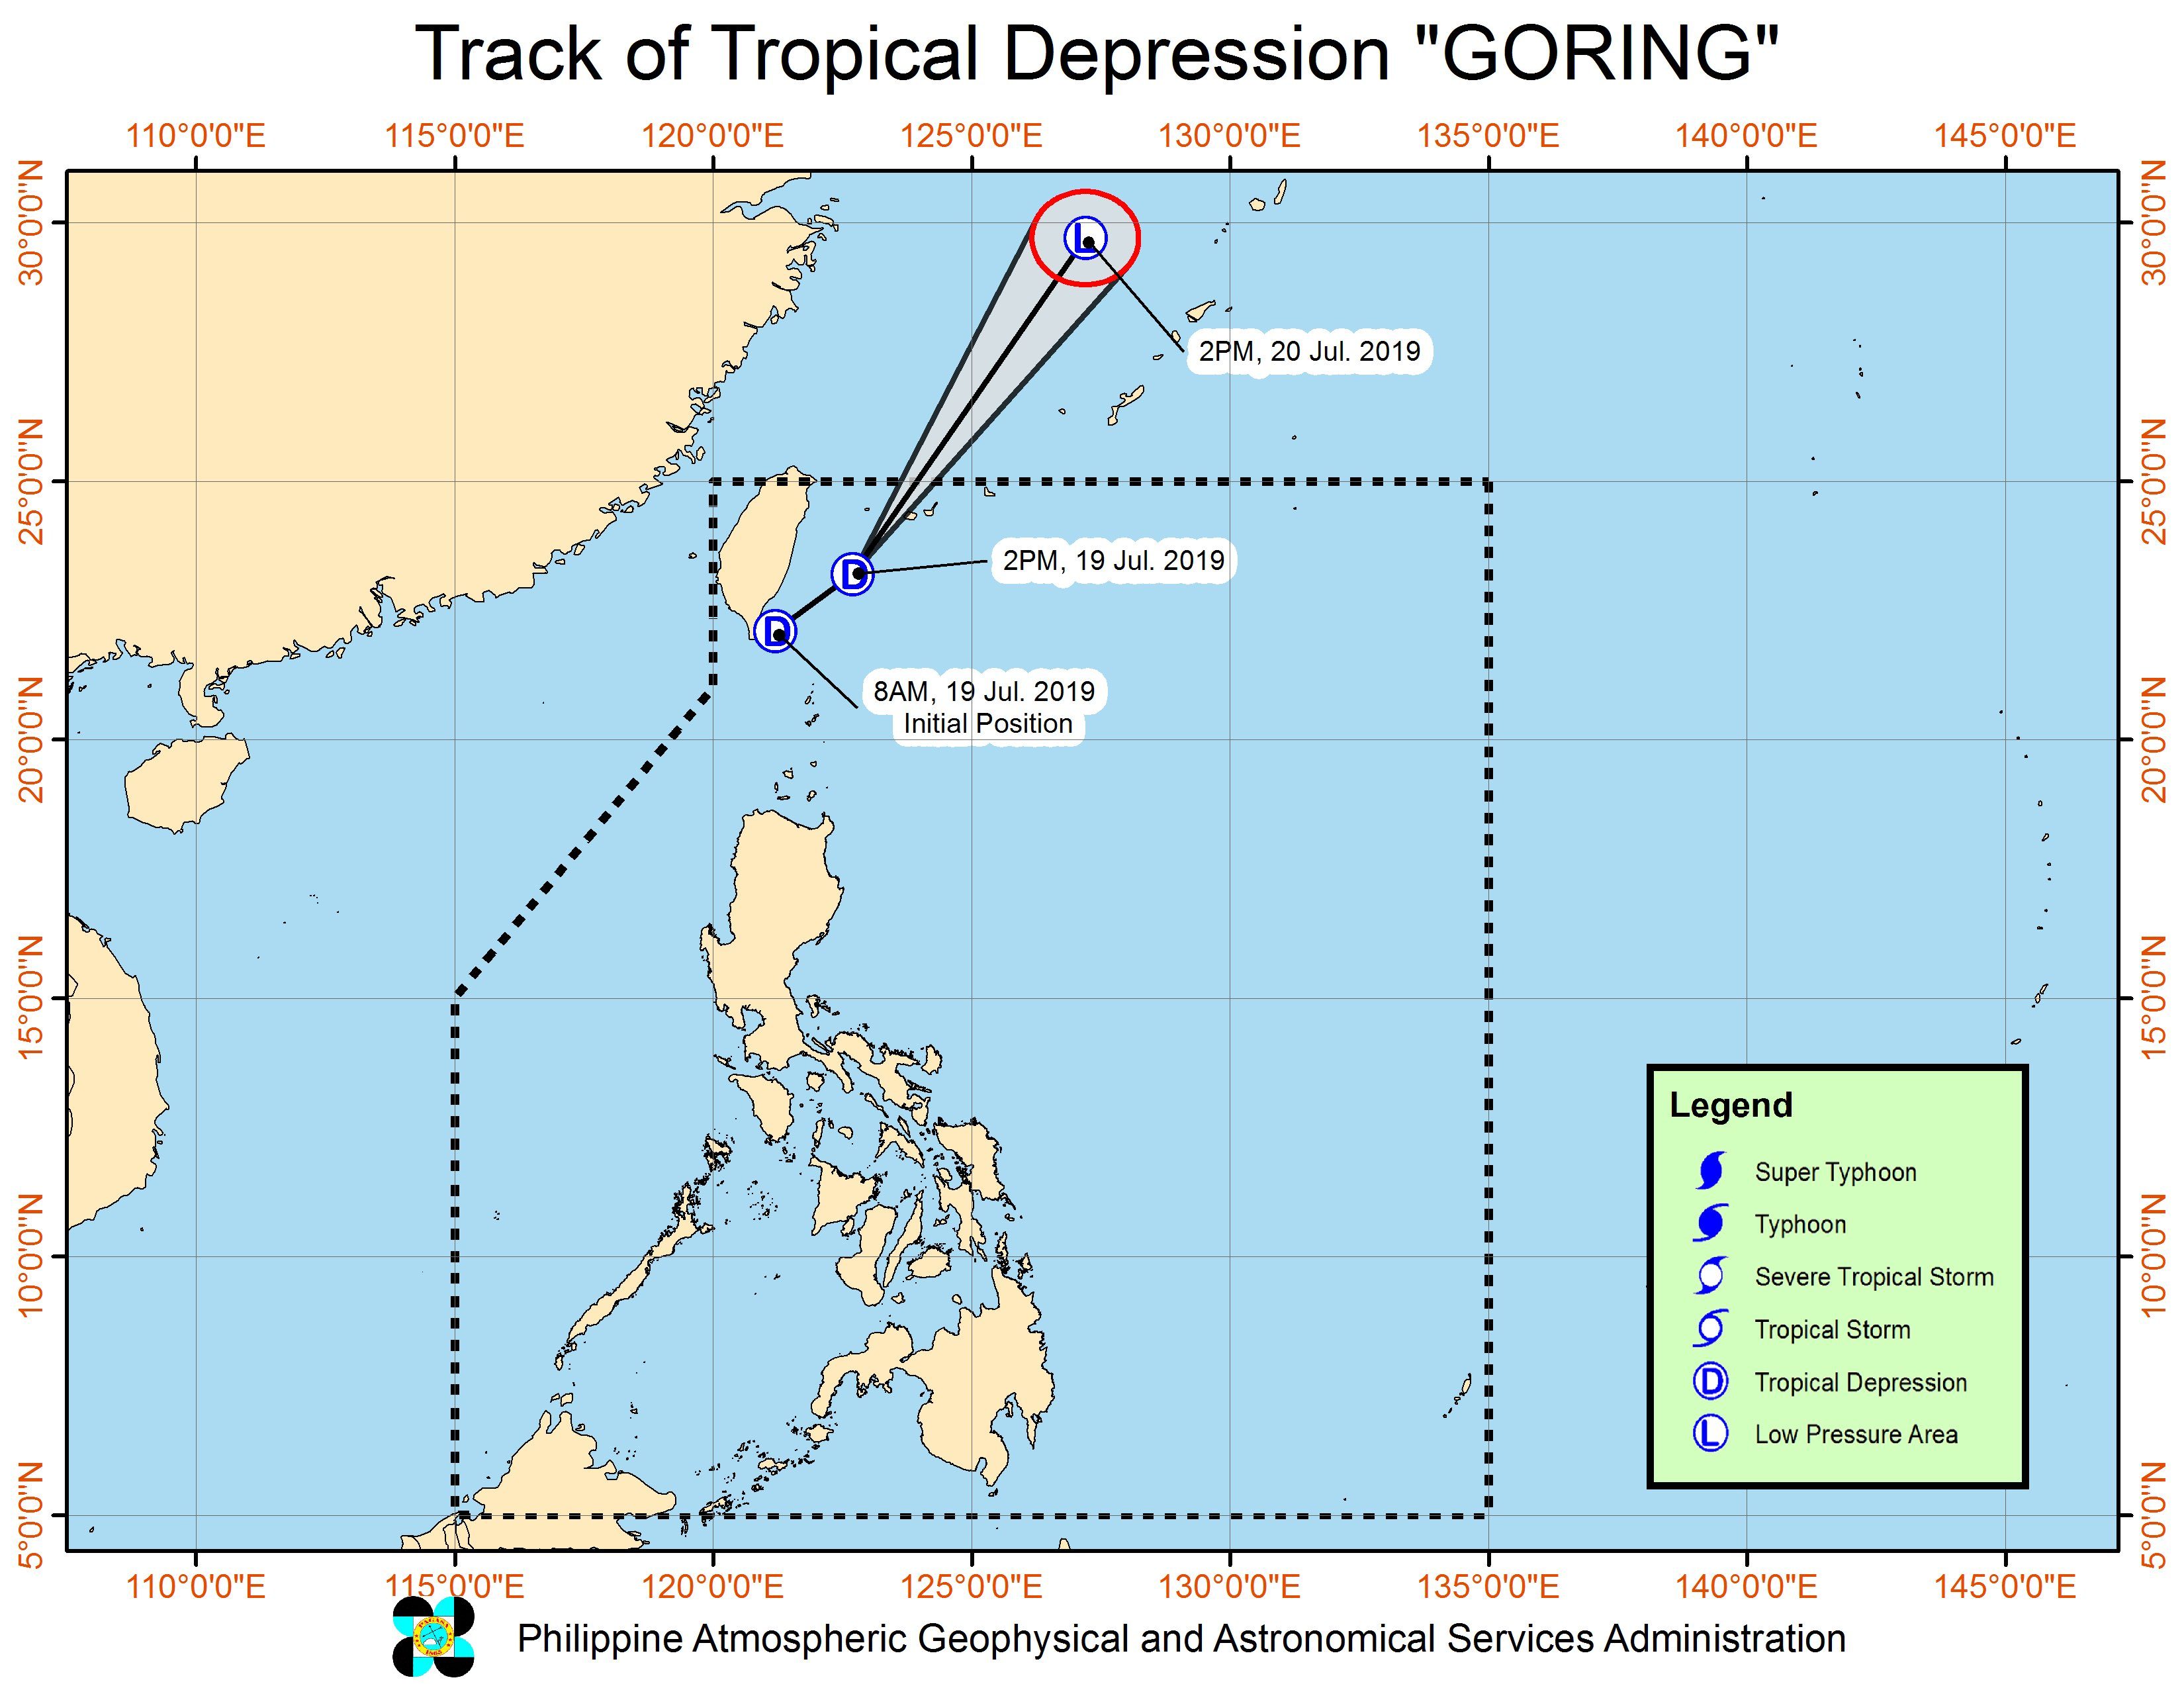 Forecast track of Tropical Depression Goring as of July 19, 2019, 5 pm. Image from PAGASA 